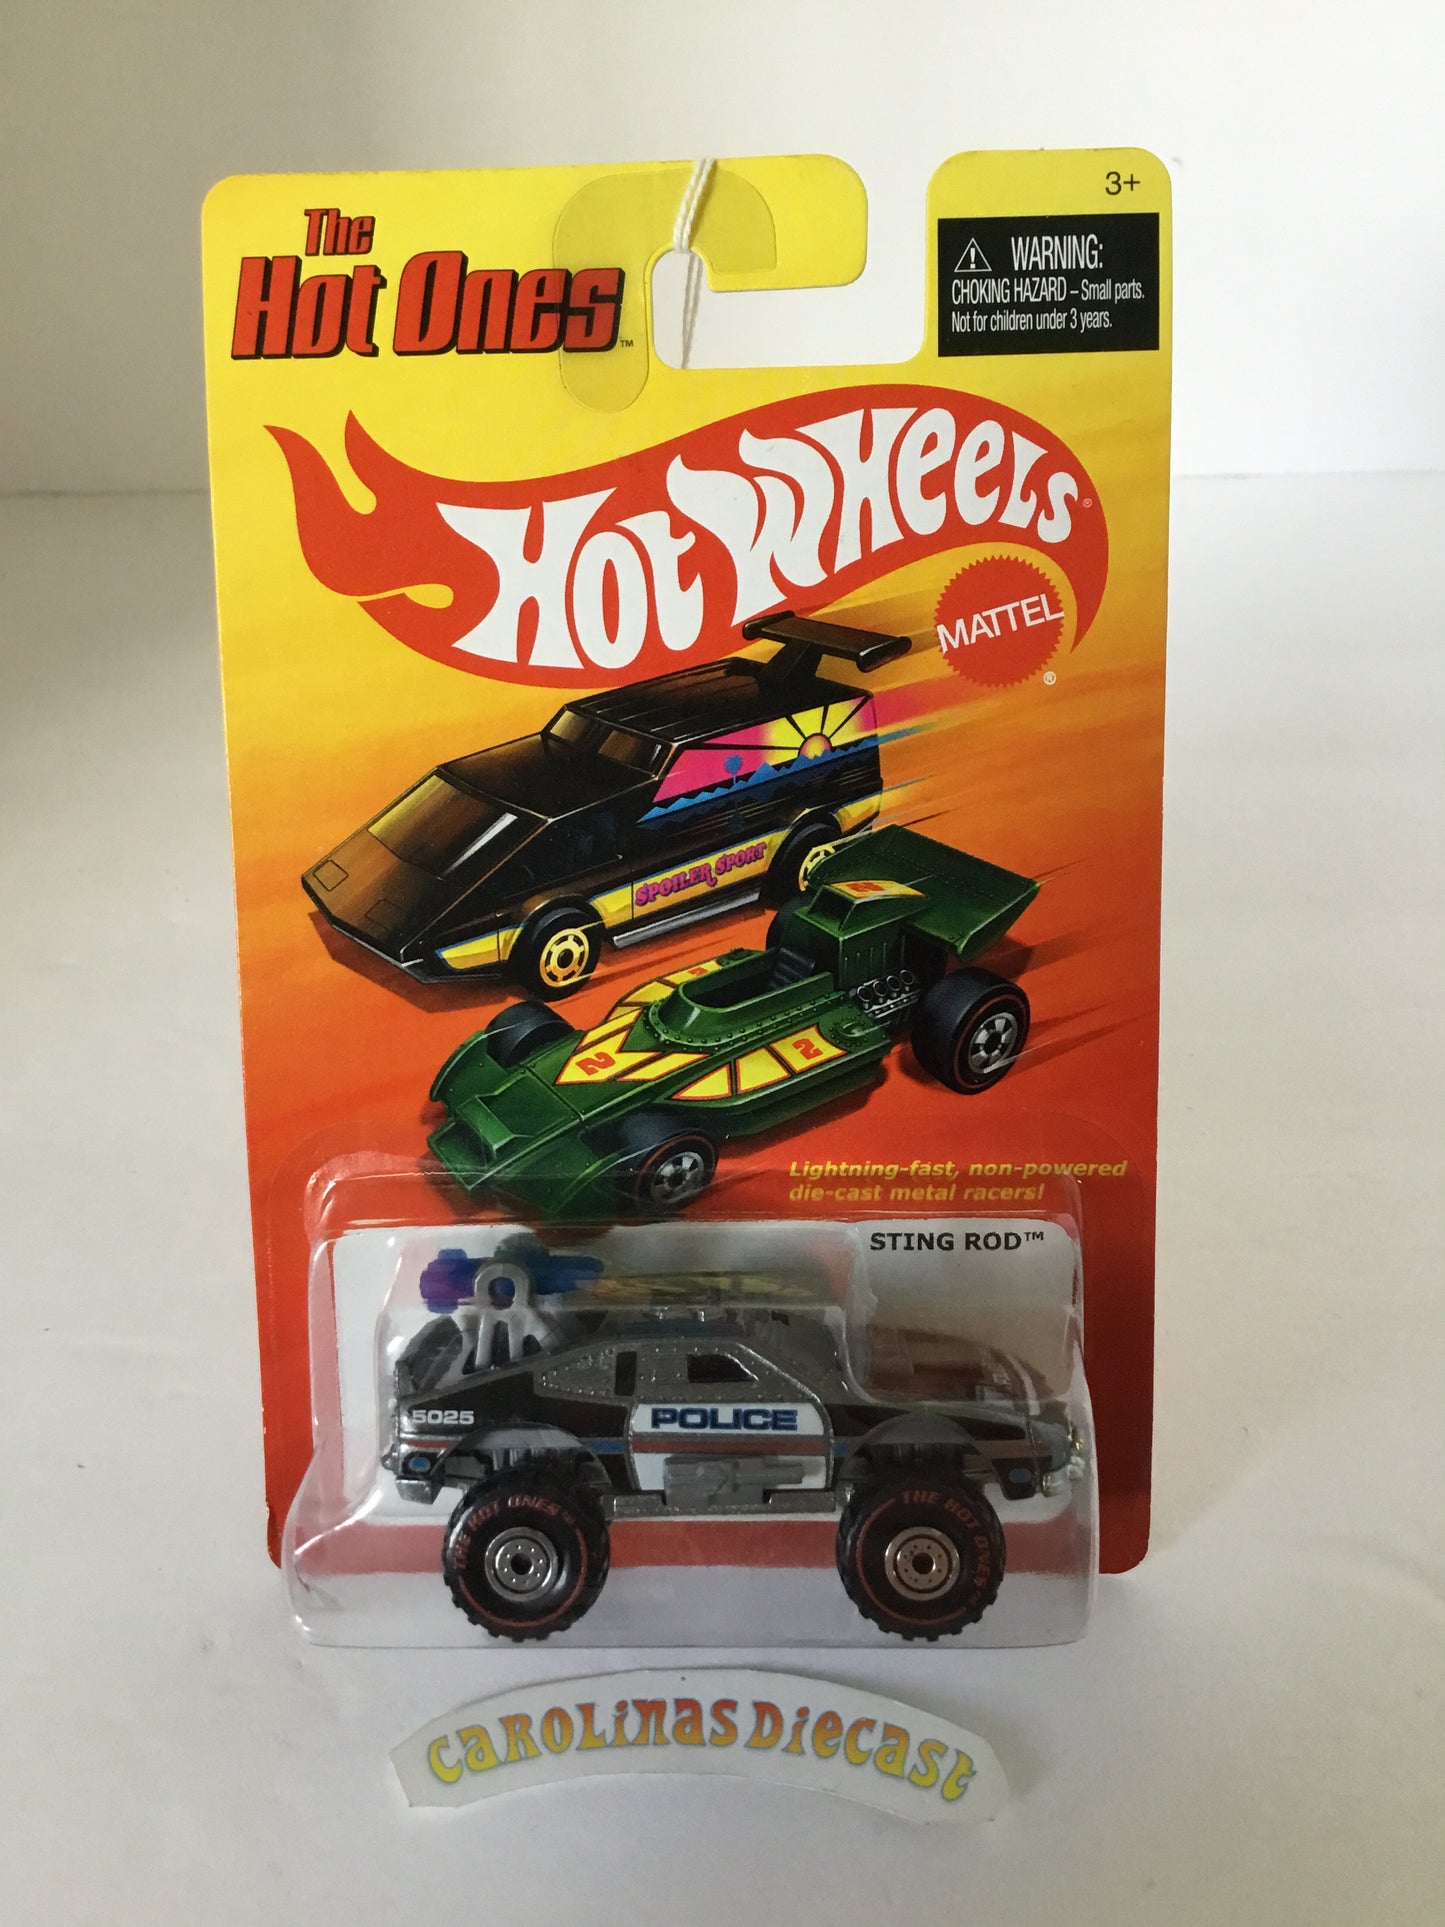 Hot wheels the hot ones CHASE Sting Rod Chase piece